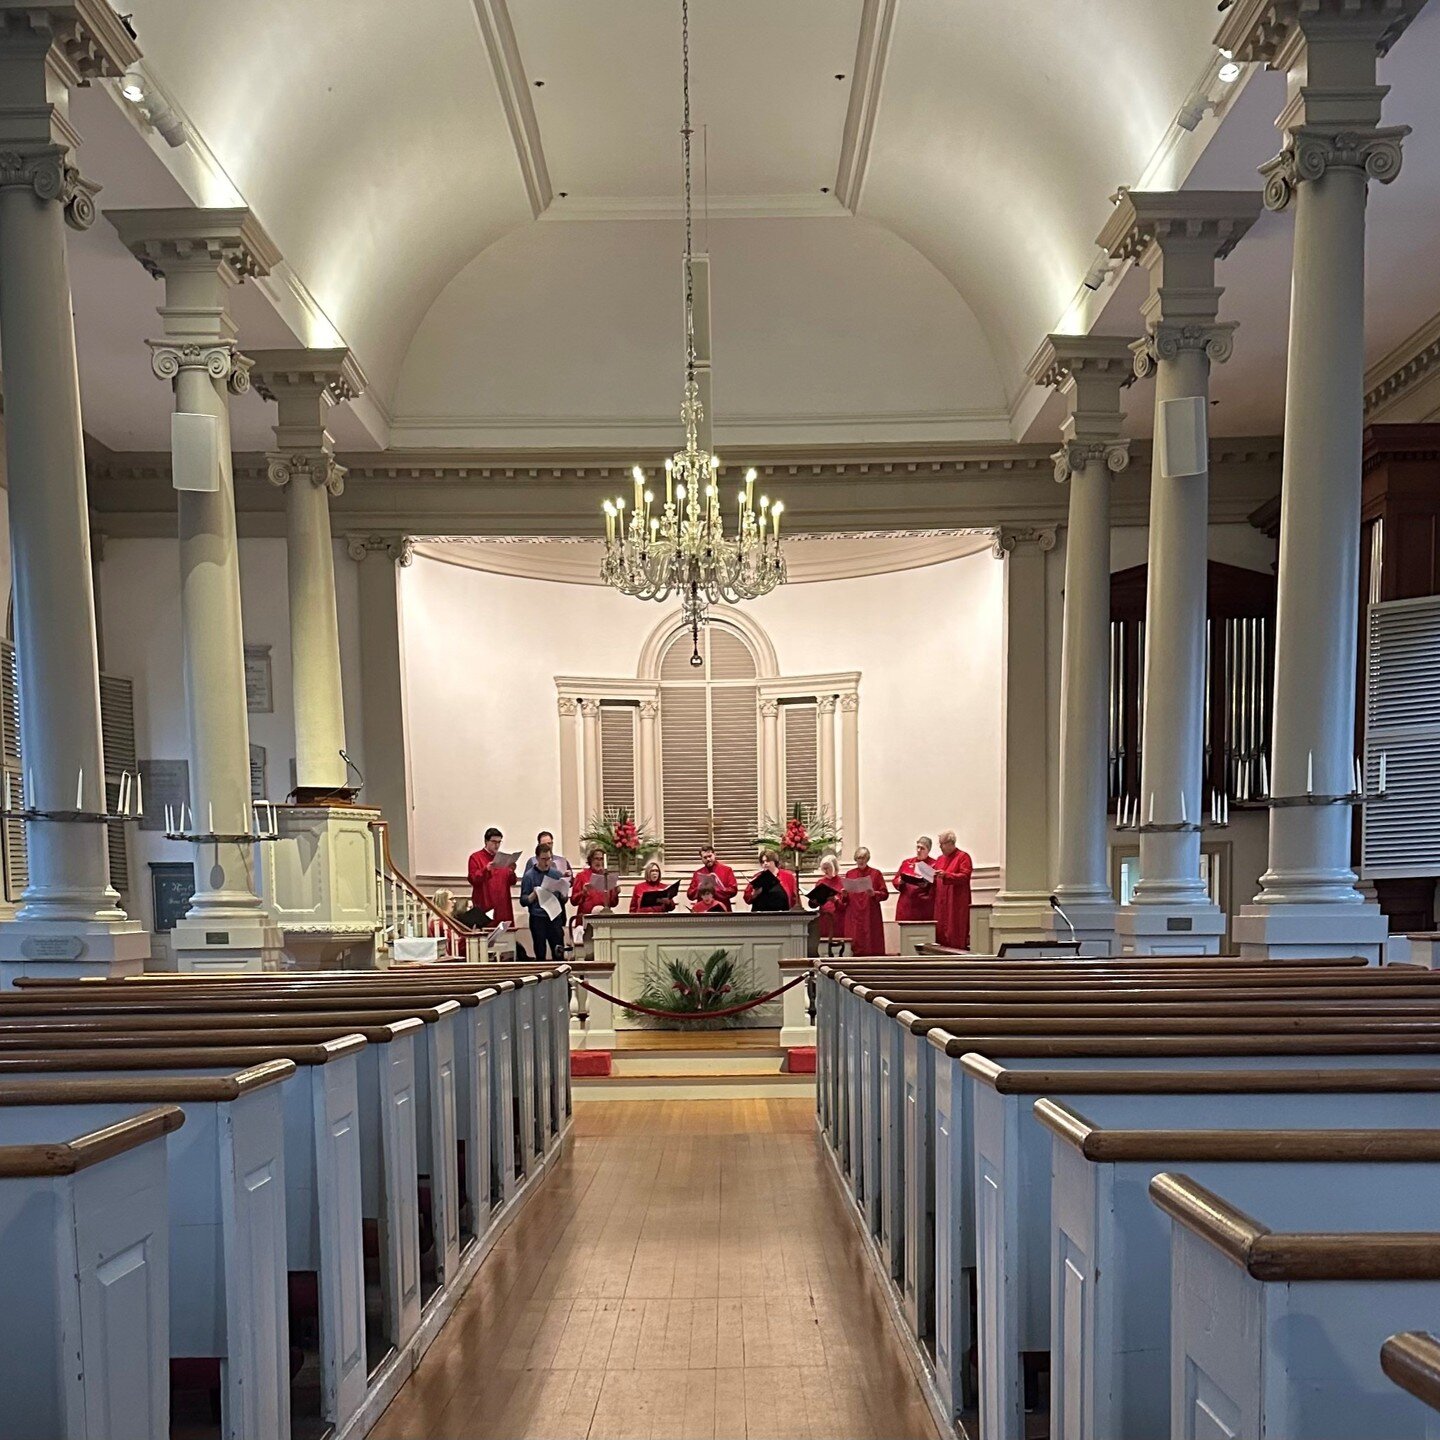 Behind the scenes as the choir rehearses, the clergy and the altar guild prepare for worship. 

Maundy Thursday service begins at 7:00 PM, in person and online. 

For more on Holy Week visit cccambridge.org